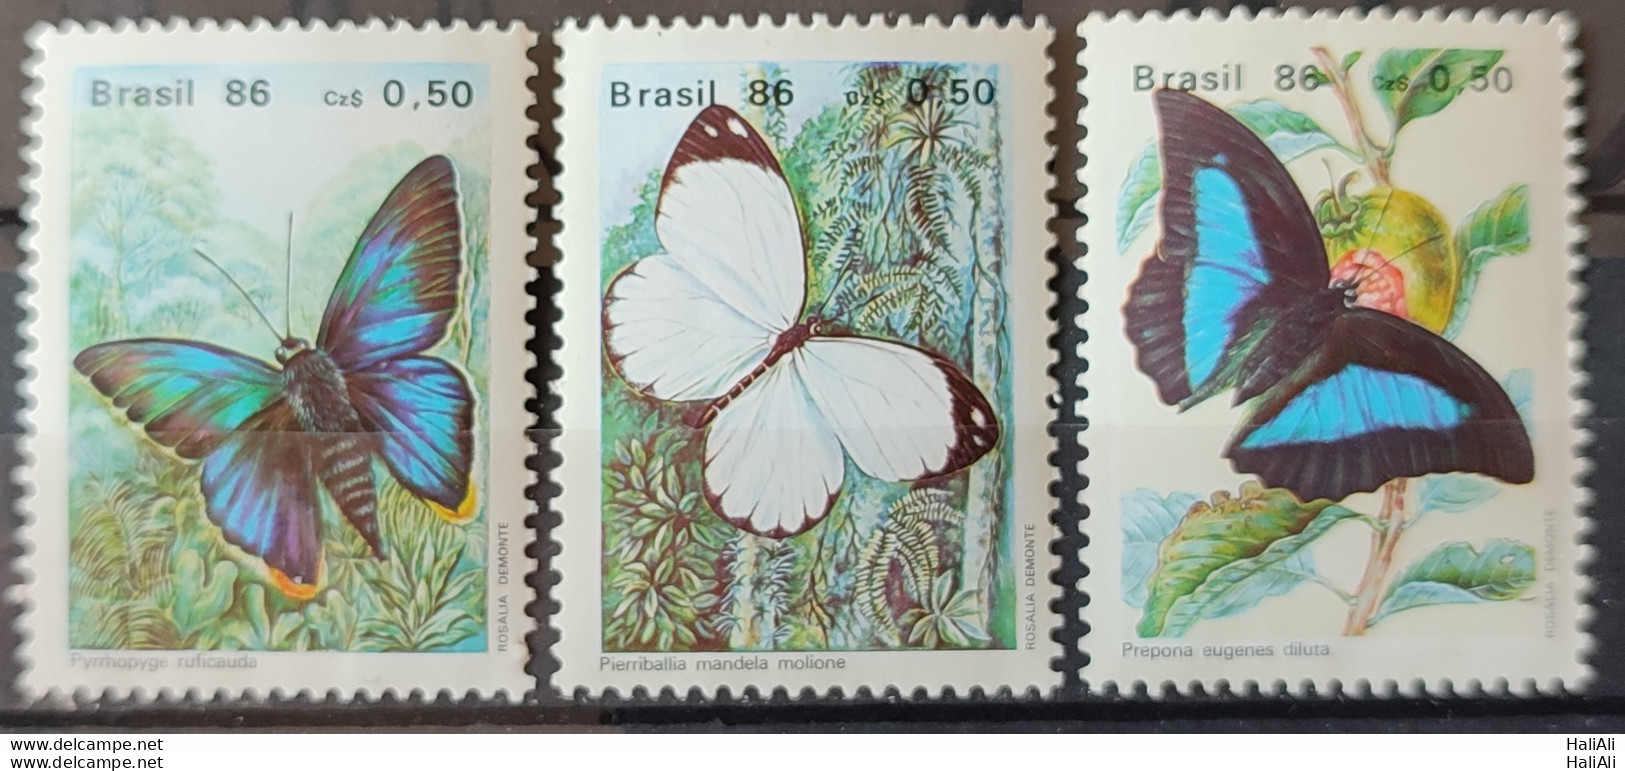 C 1512 Brazil Stamp Butterfly Insects 1986 Complete Series 2.jpg - Nuevos